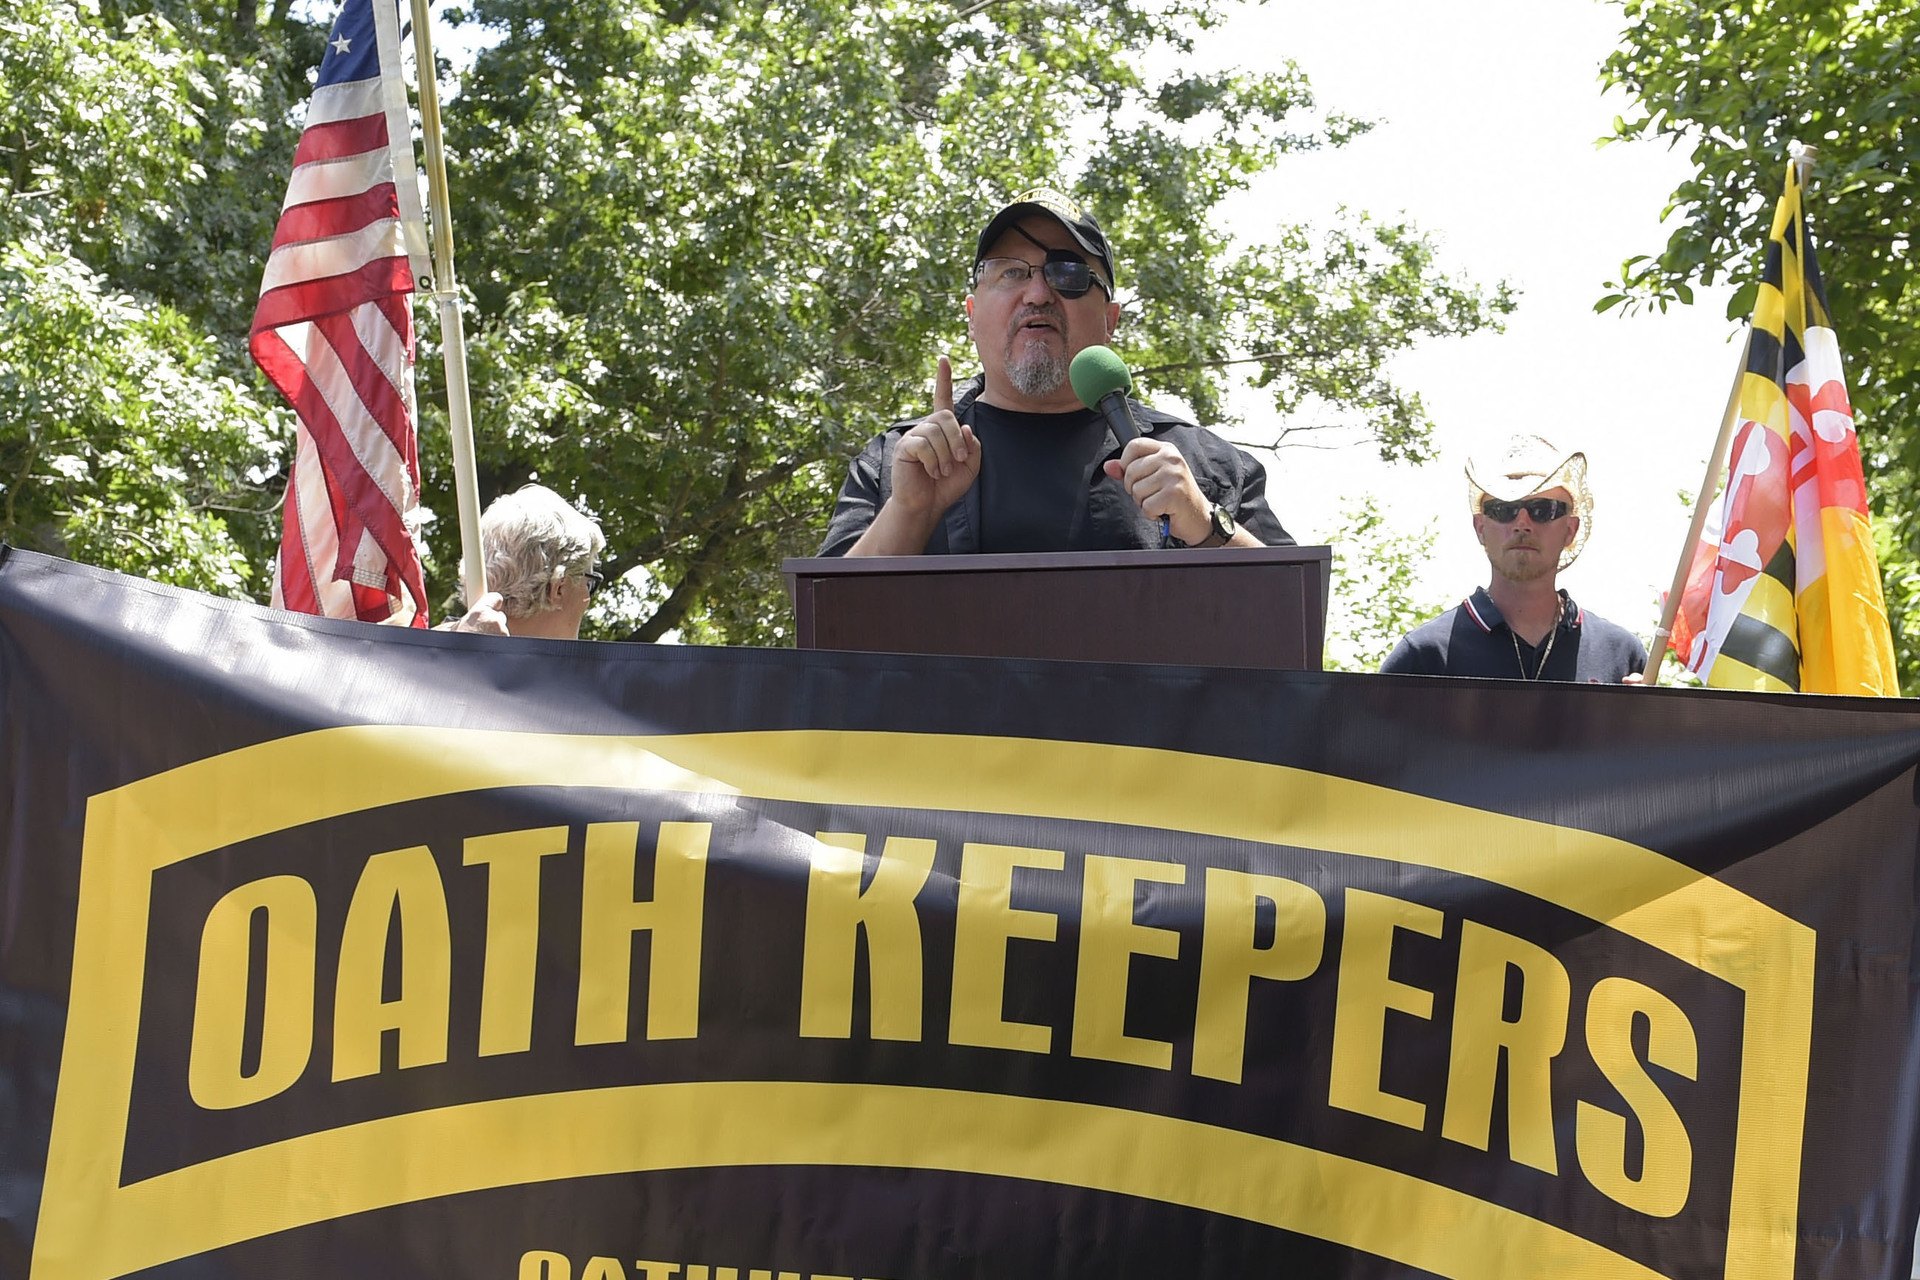 Stewart Rhodes speaking at a rally for the Oath Keepers.